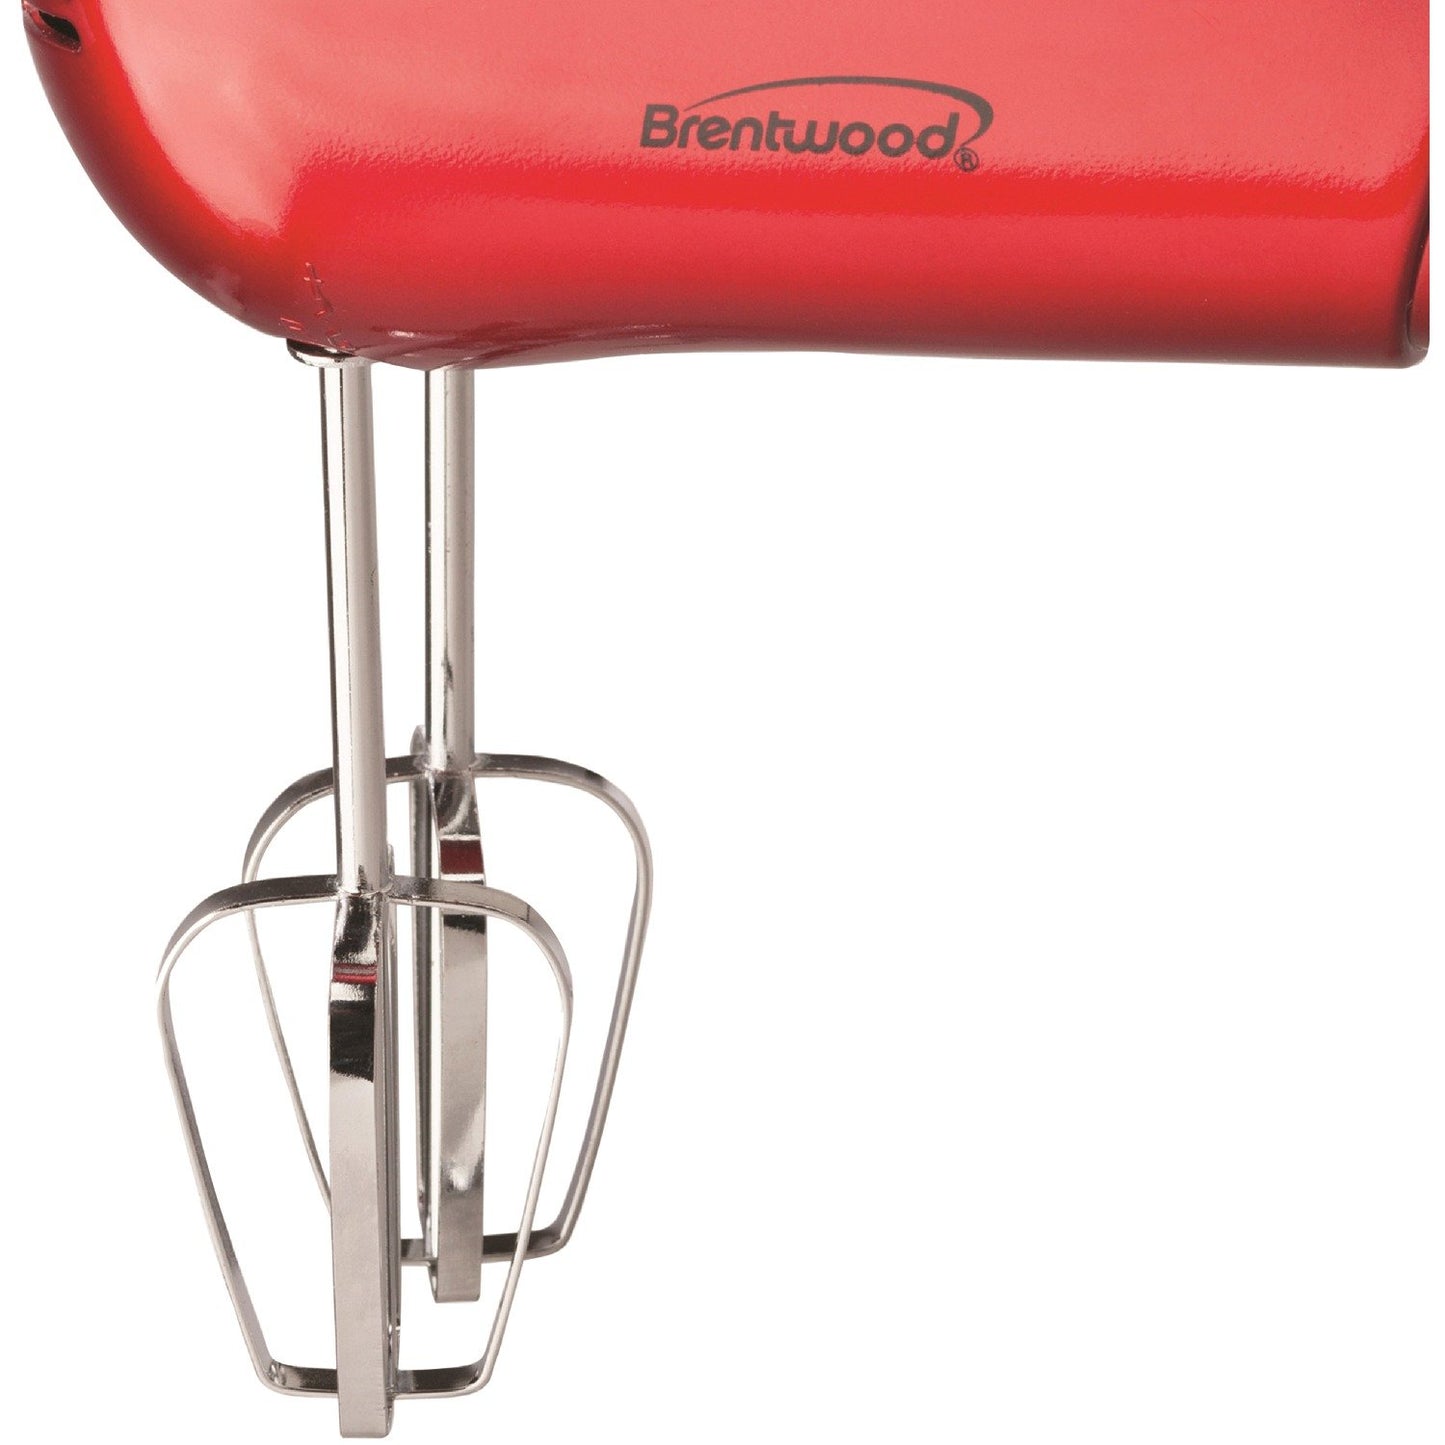 Brentwood Appliances HM46 5-Speed Electric Hand Mixer (Red)